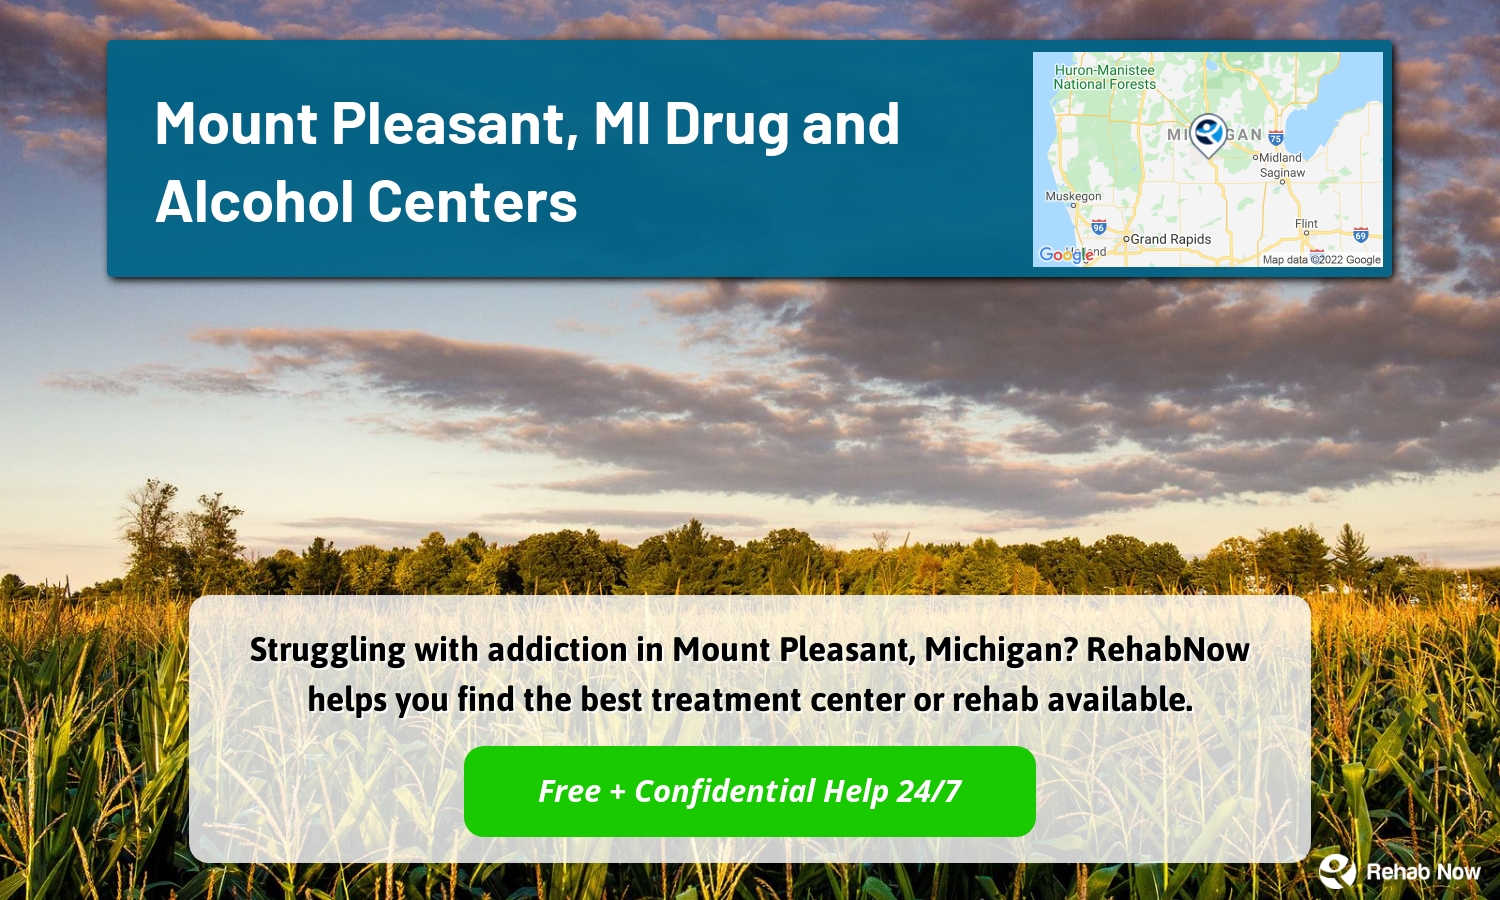 Struggling with addiction in Mount Pleasant, Michigan? RehabNow helps you find the best treatment center or rehab available.